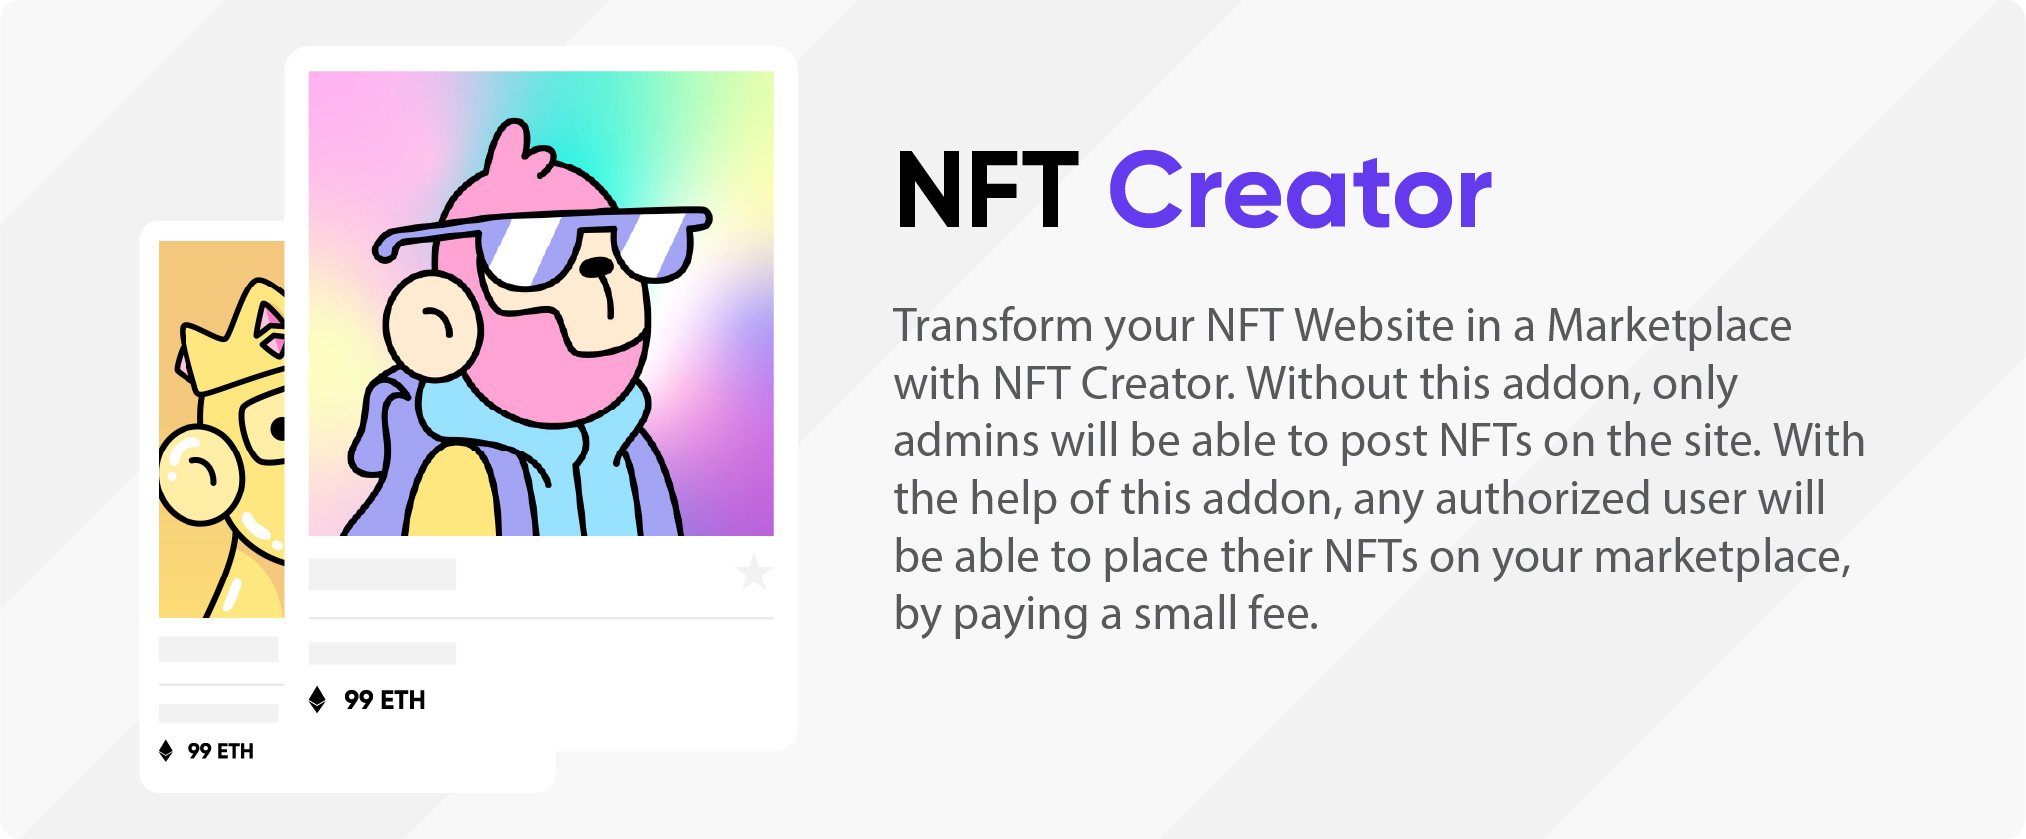 NFT Creator: Transform your NFT Website in a Marketplace with NFT Creator. Without this addon, only admins will be able to post NFTs on the site. With the help of this addon, any authorized user will be able to place their NFTs on your marketplace, by paying a small fee.